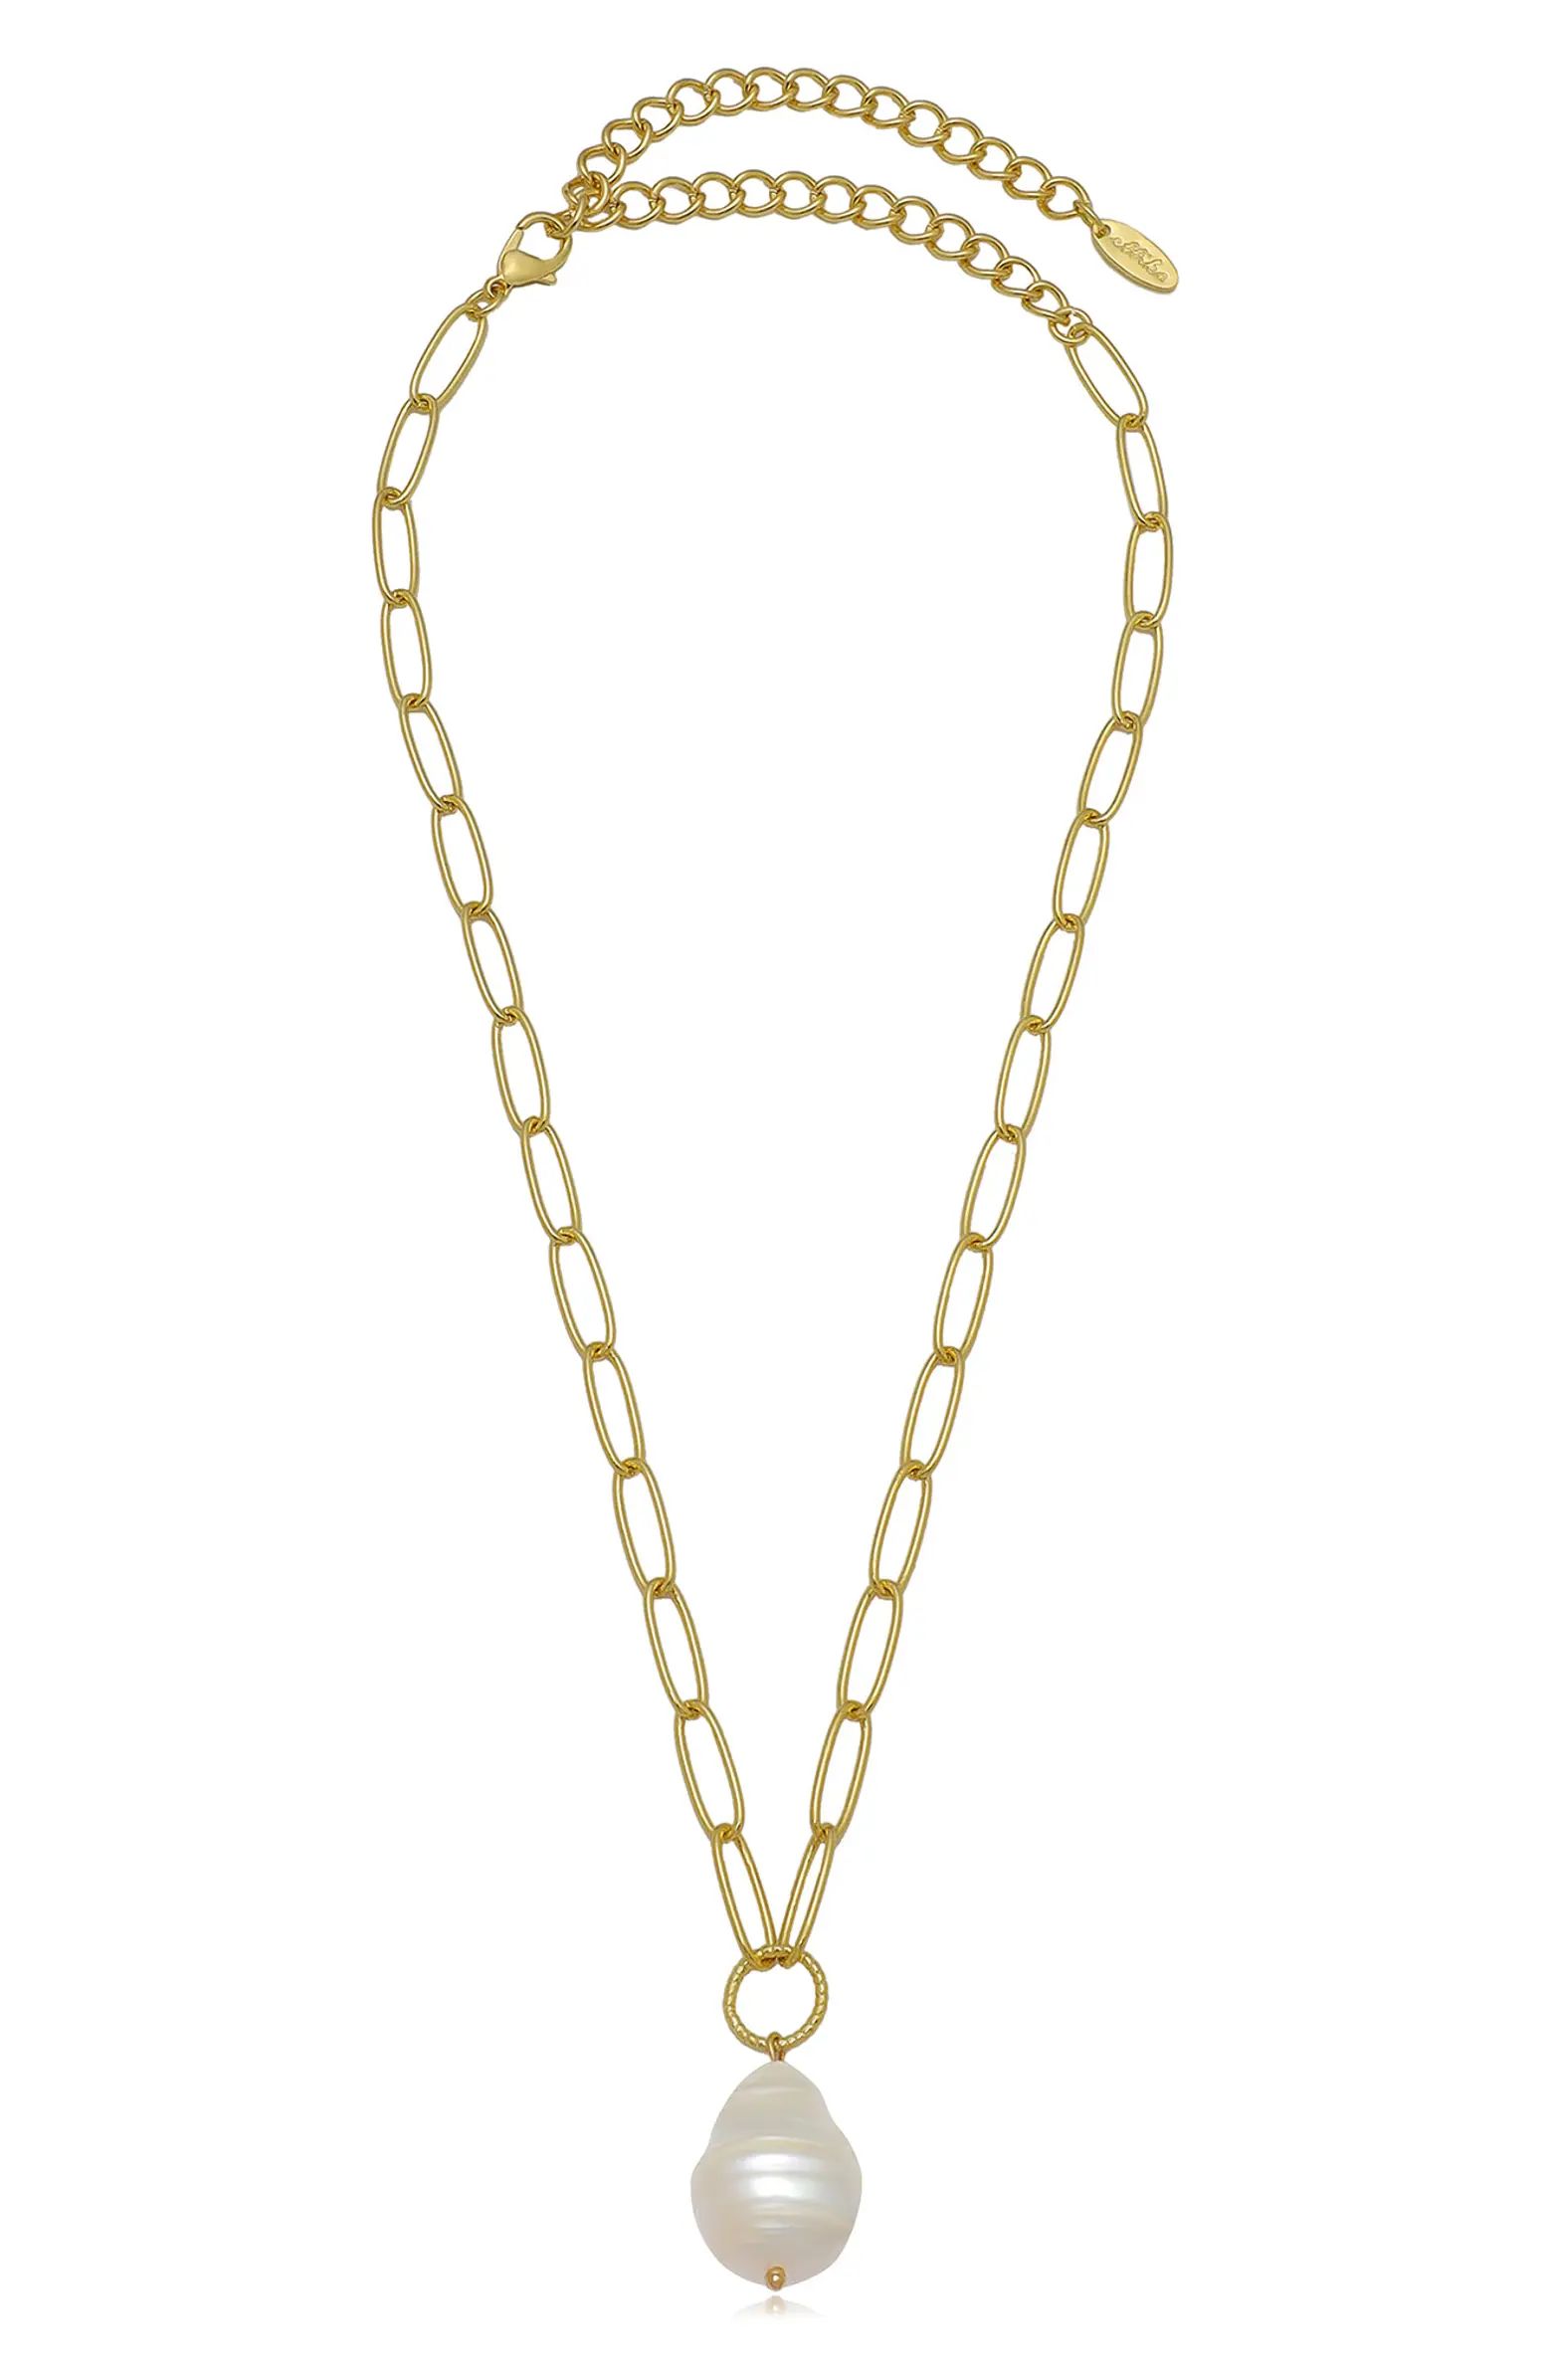 Freshwater Pearl Pendant Necklace | Nordstrom